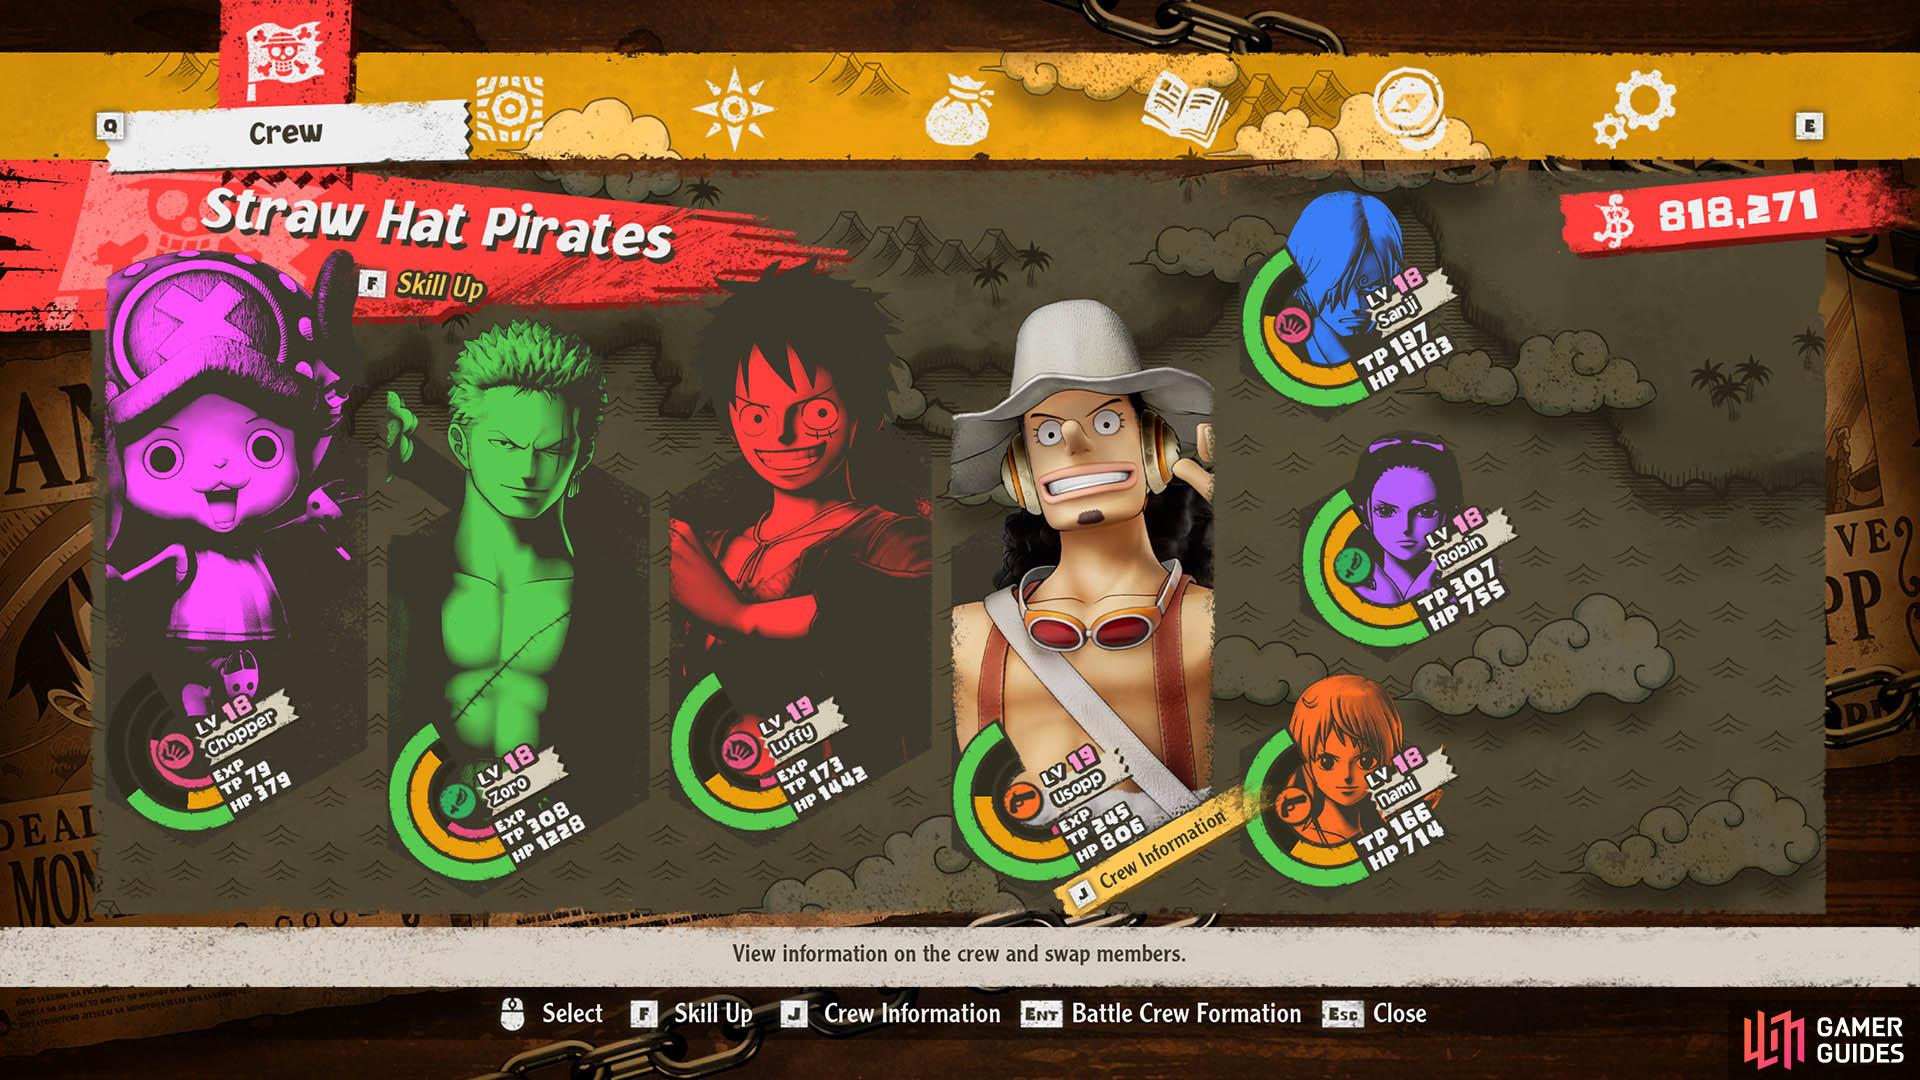 ONE PIECE ODYSSEY Starter Guide: Tips to know before playing the